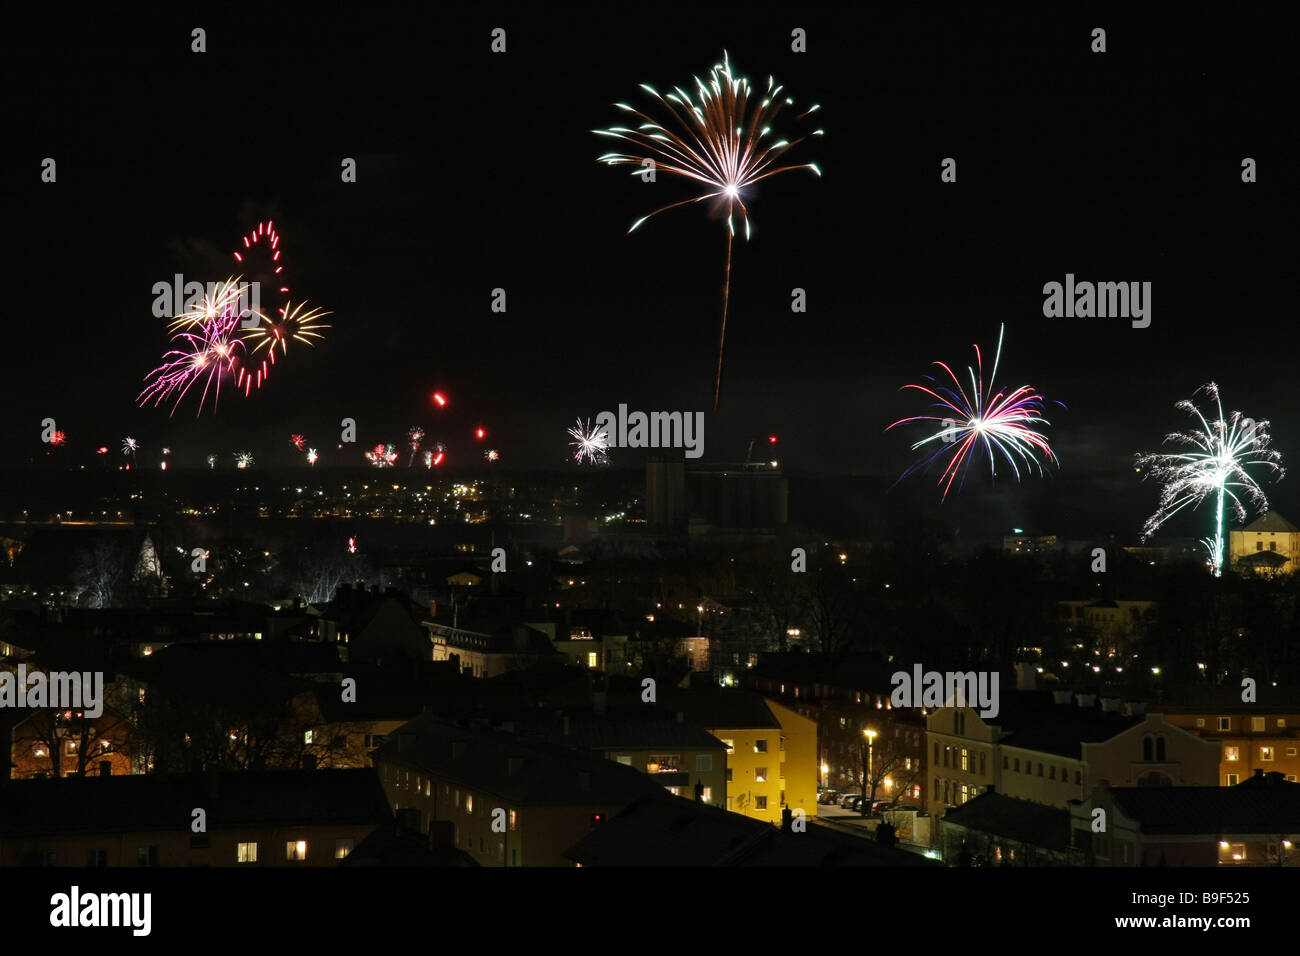 Fireworks celebrating a new year in the city of Nyköping, Sweden. Stock Photo